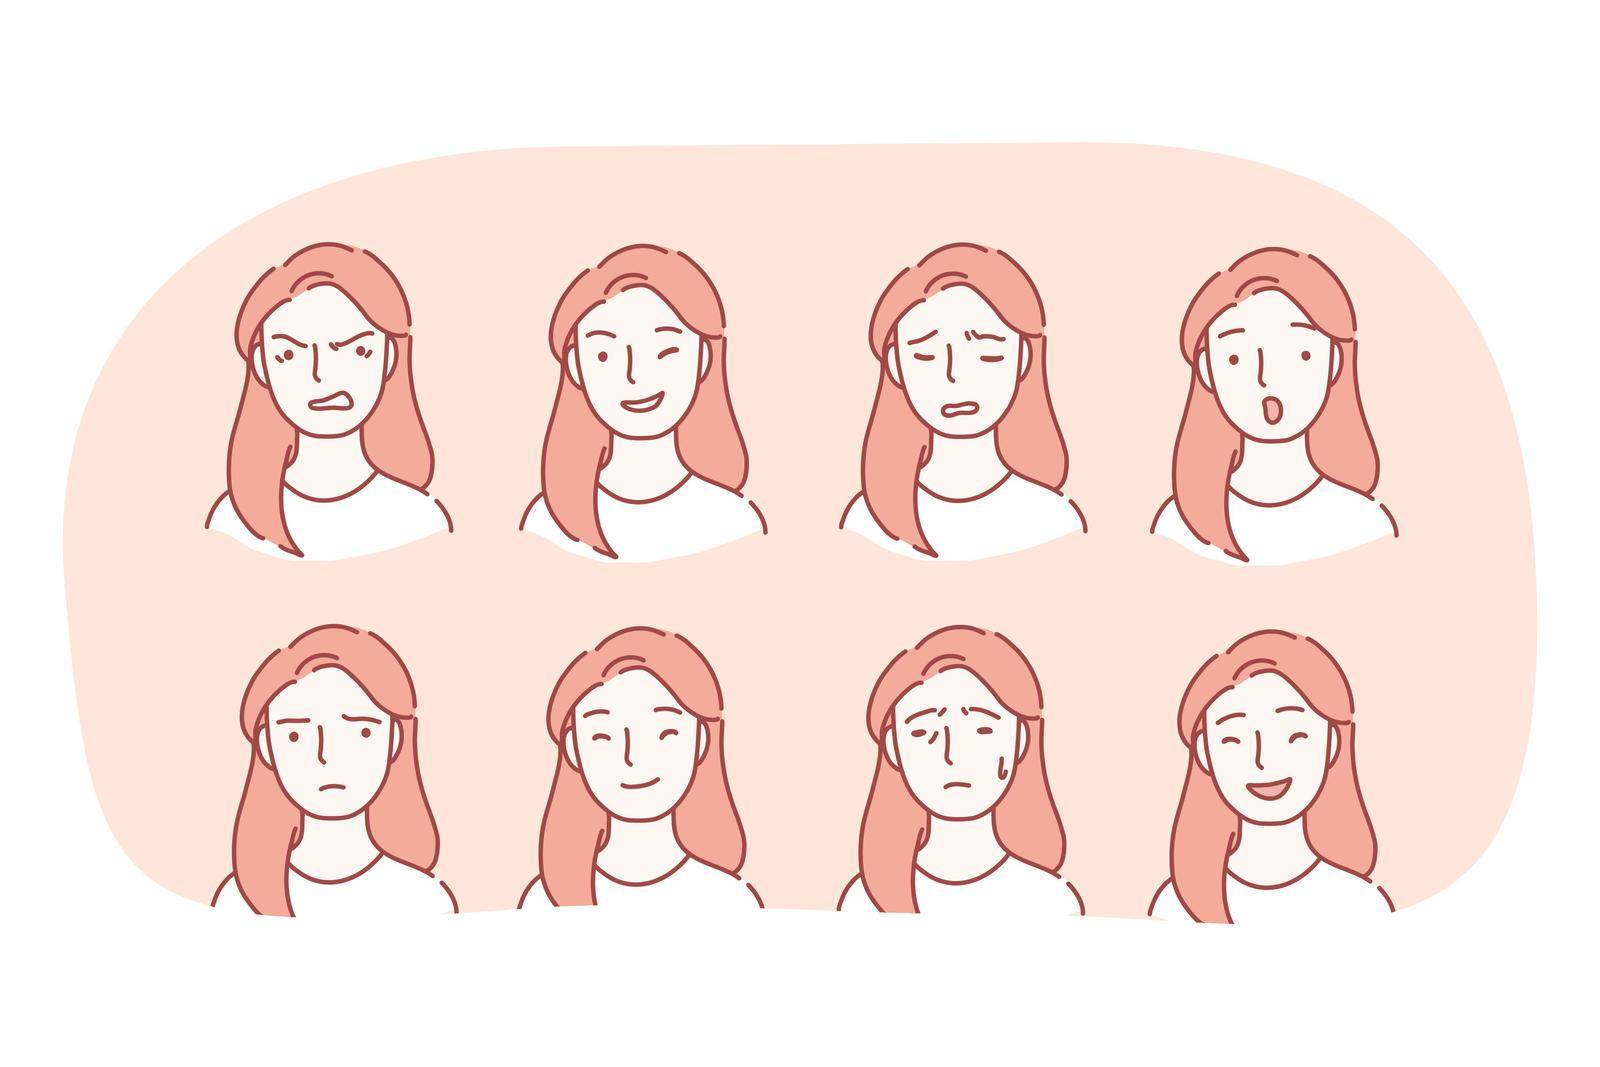 Different emotions and variety of facial expressions concept. Set of female faces expressing various emotions anger, happiness, frustration, surprise, crying, sadness, winking, flirt, grief